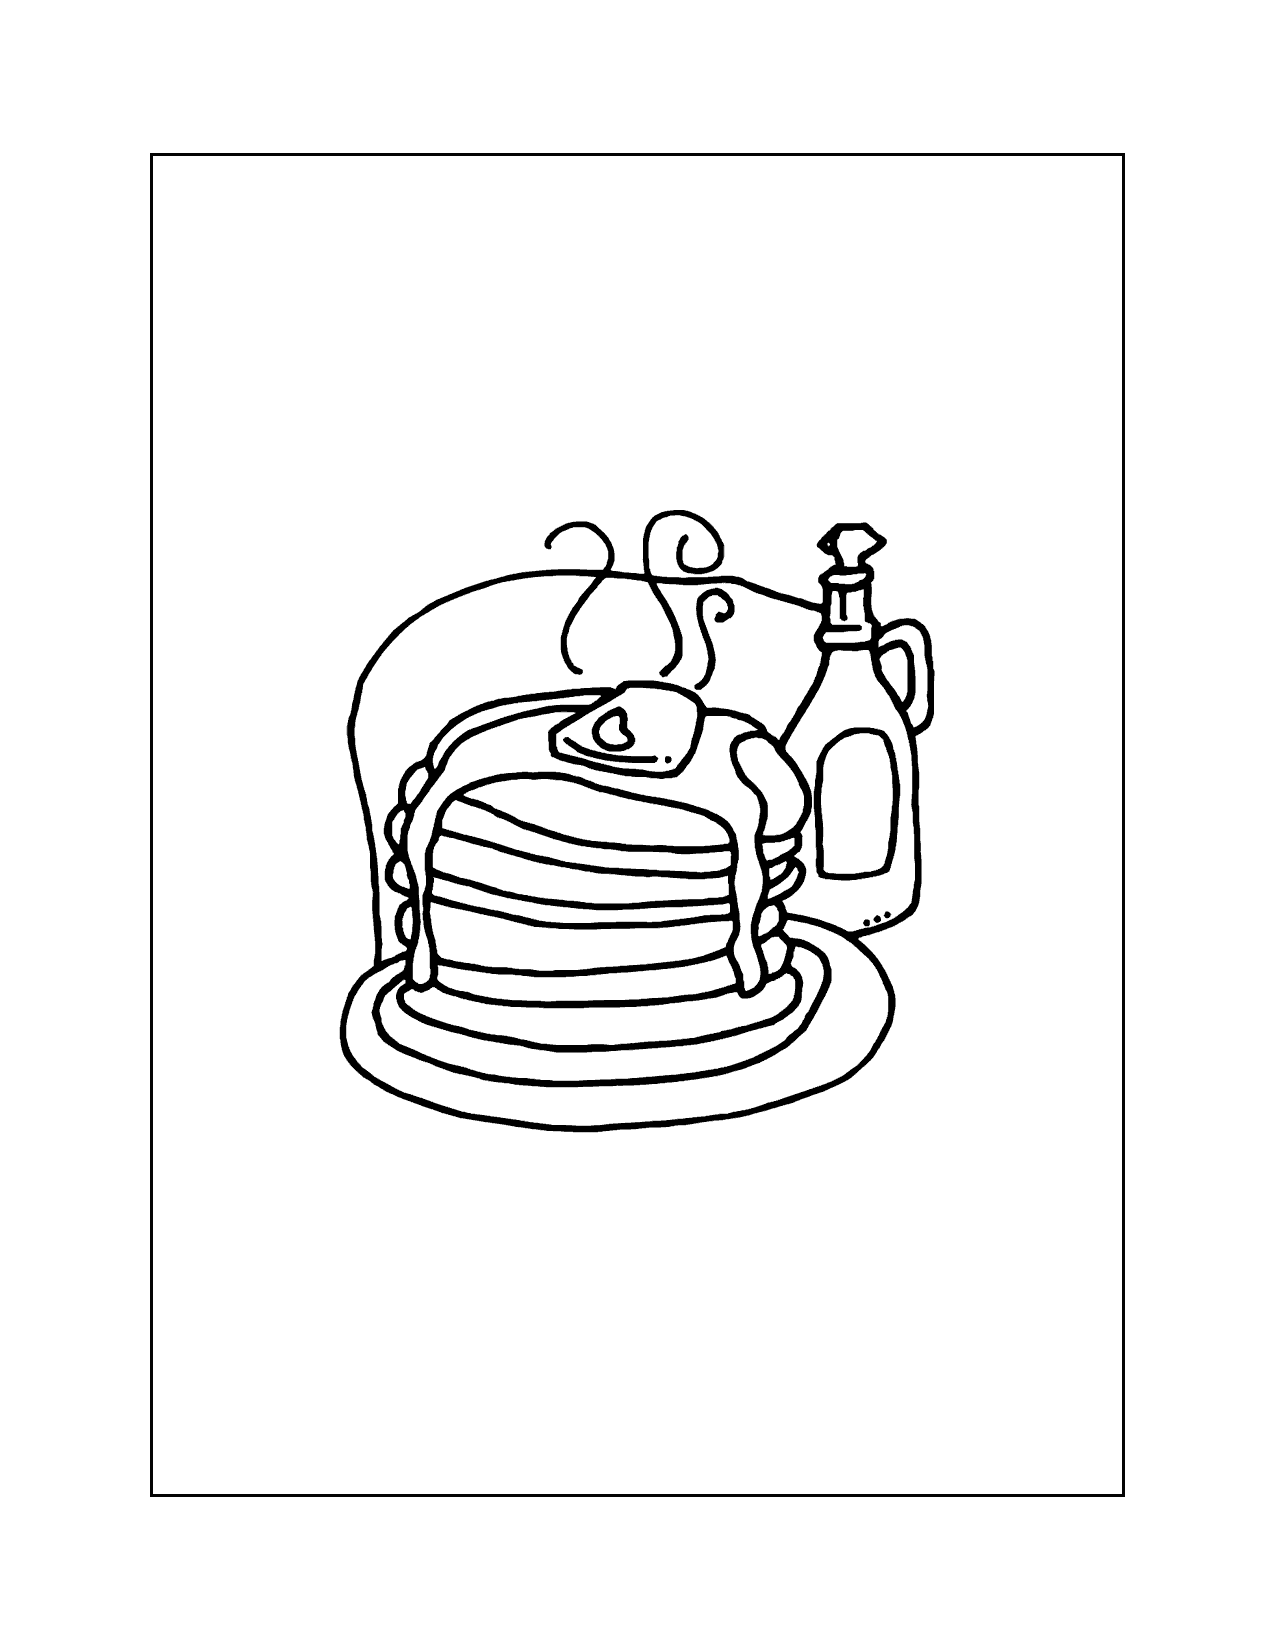 Pancakes With Butter And Syrup Coloring Page